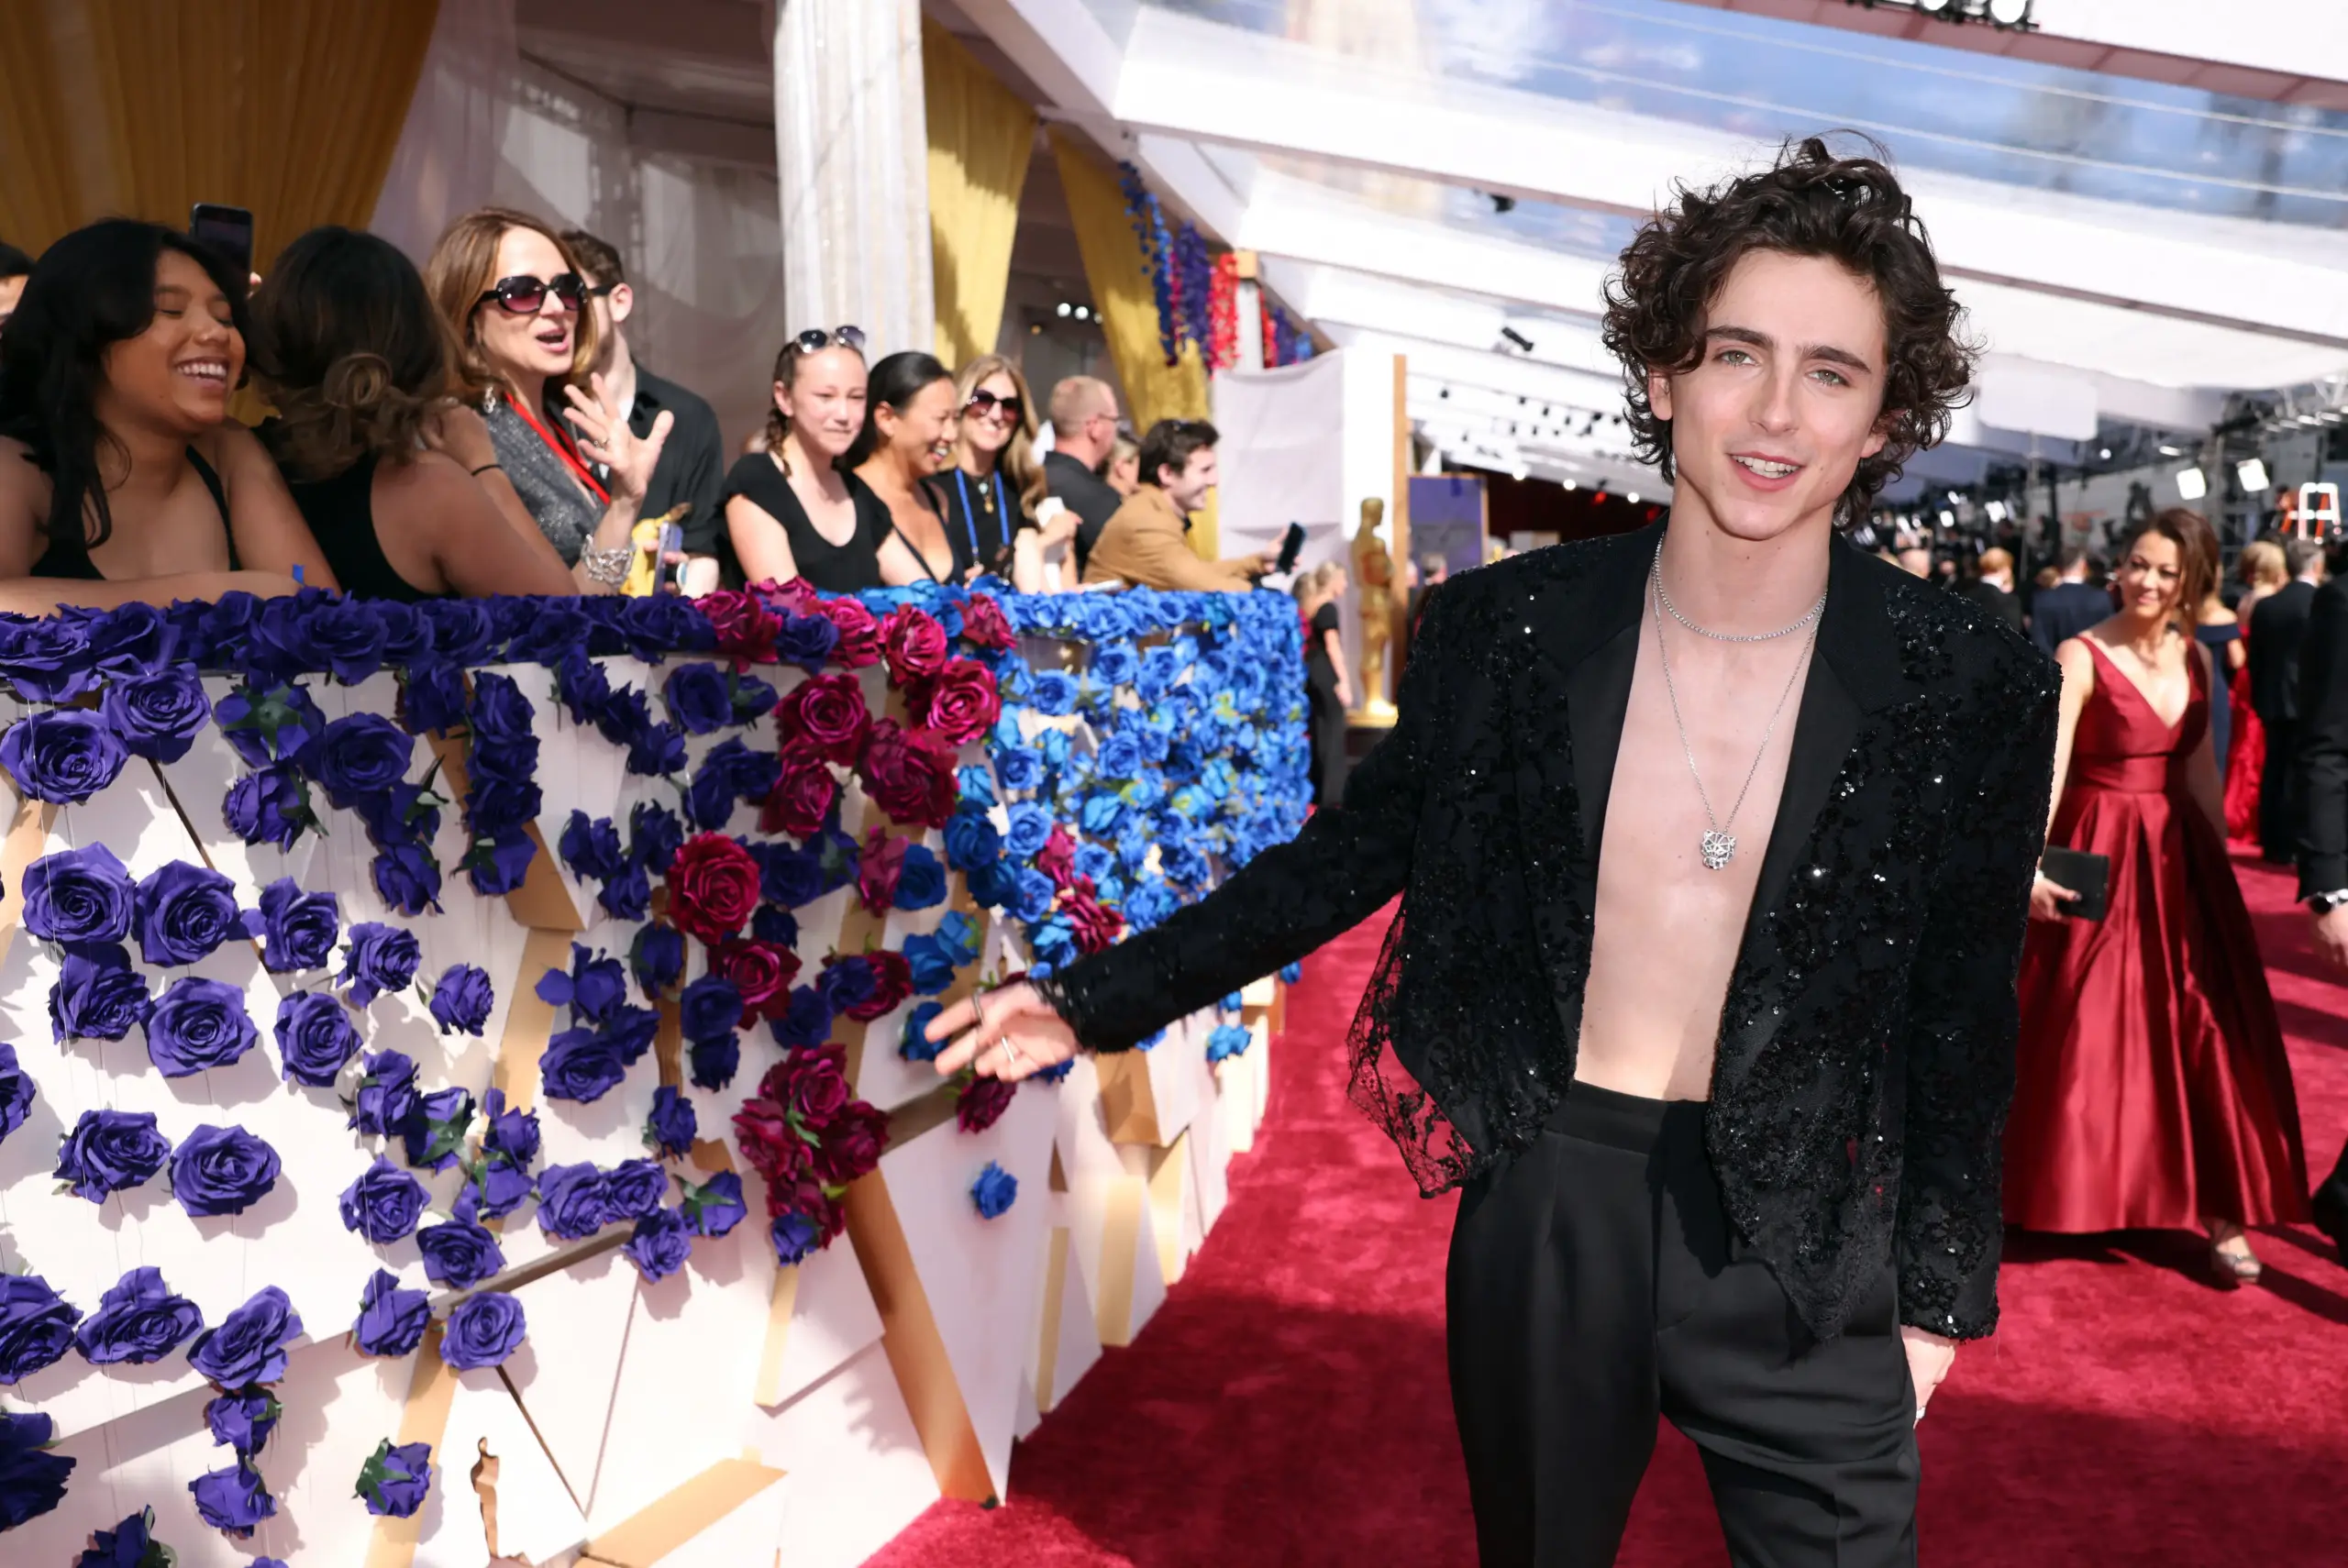 40+ Timothée Chalamet and High-res Pictures. Age, Family, Bio